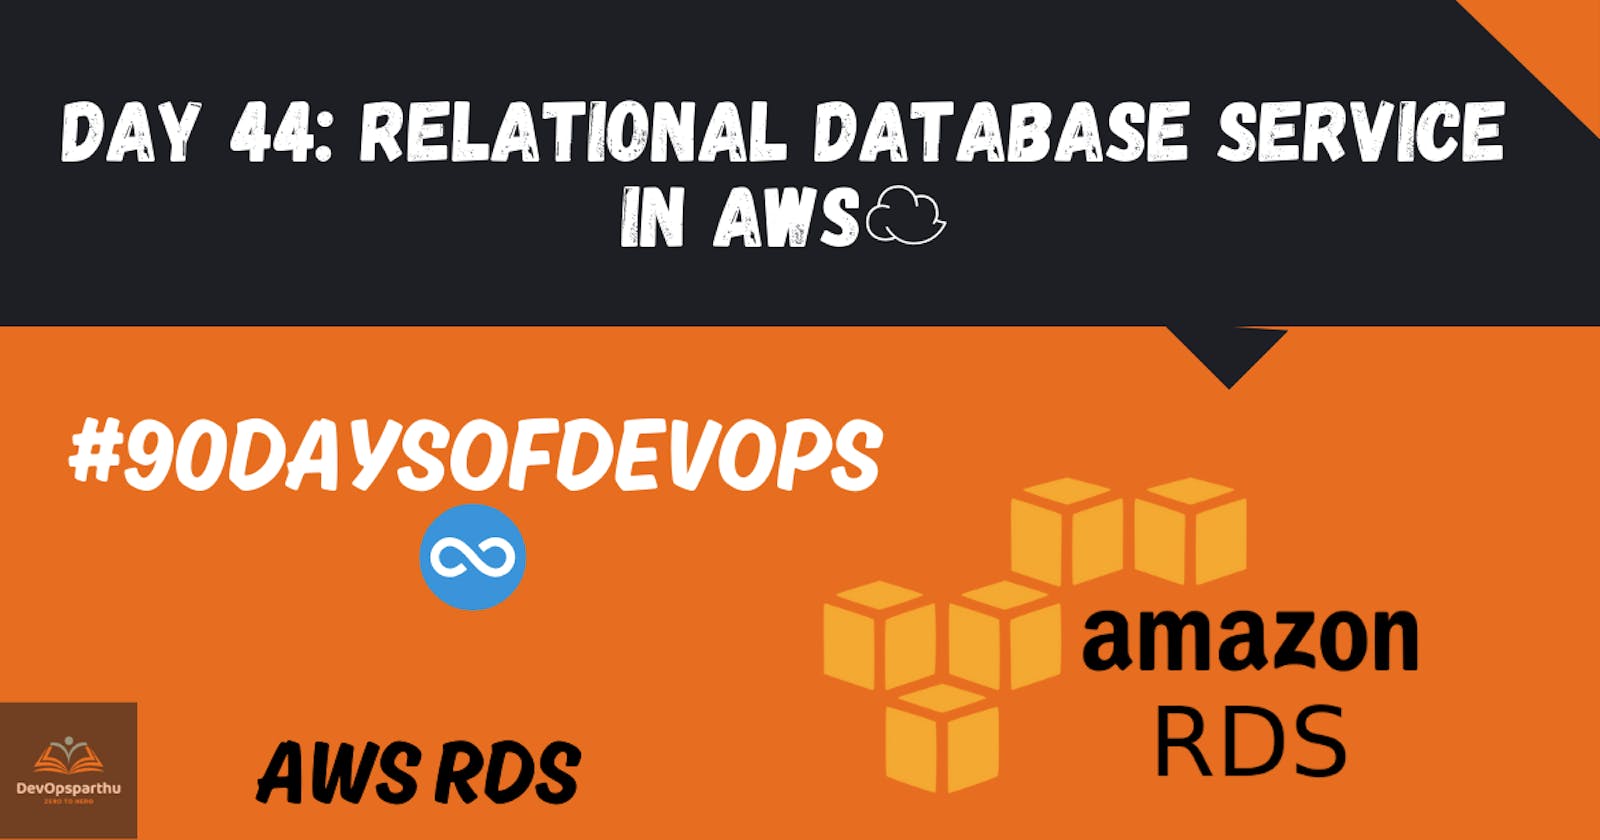 Day 44: Relational Database Service in AWS